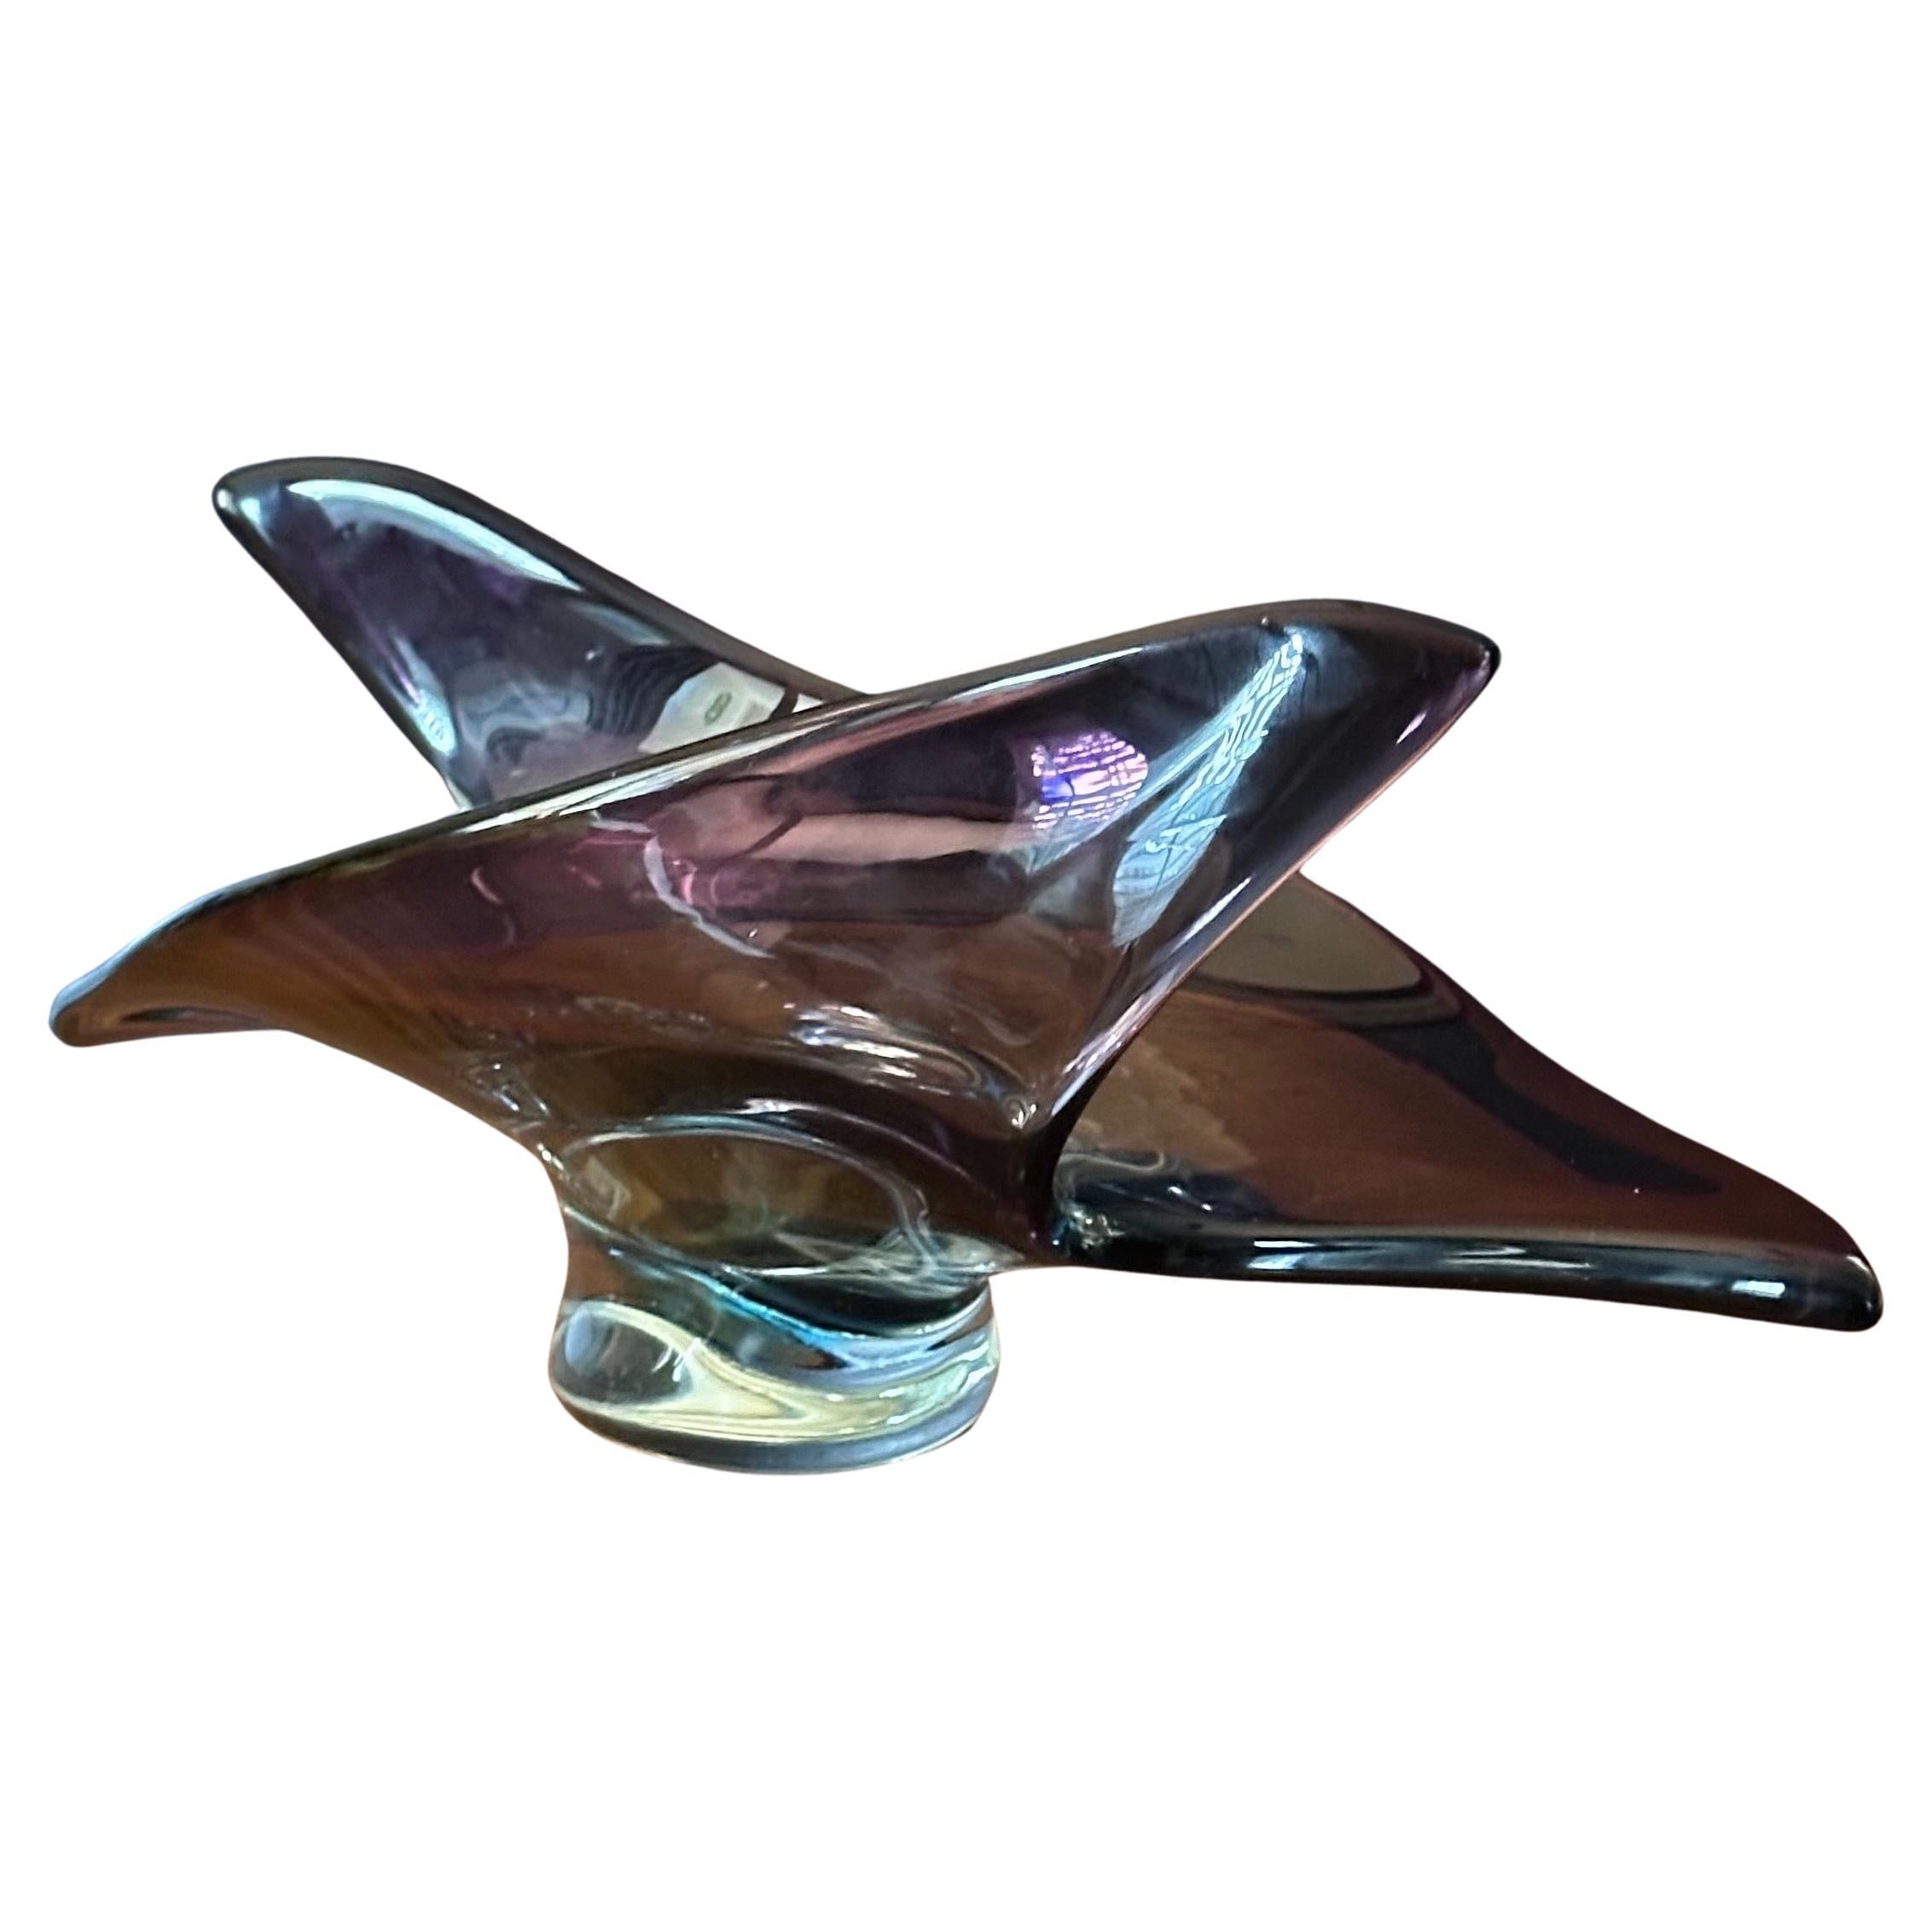 Stylish purple somerso glass free form bowl / centerpiece by Murano Glass, circa 1970s. This beautiful piece measures 17